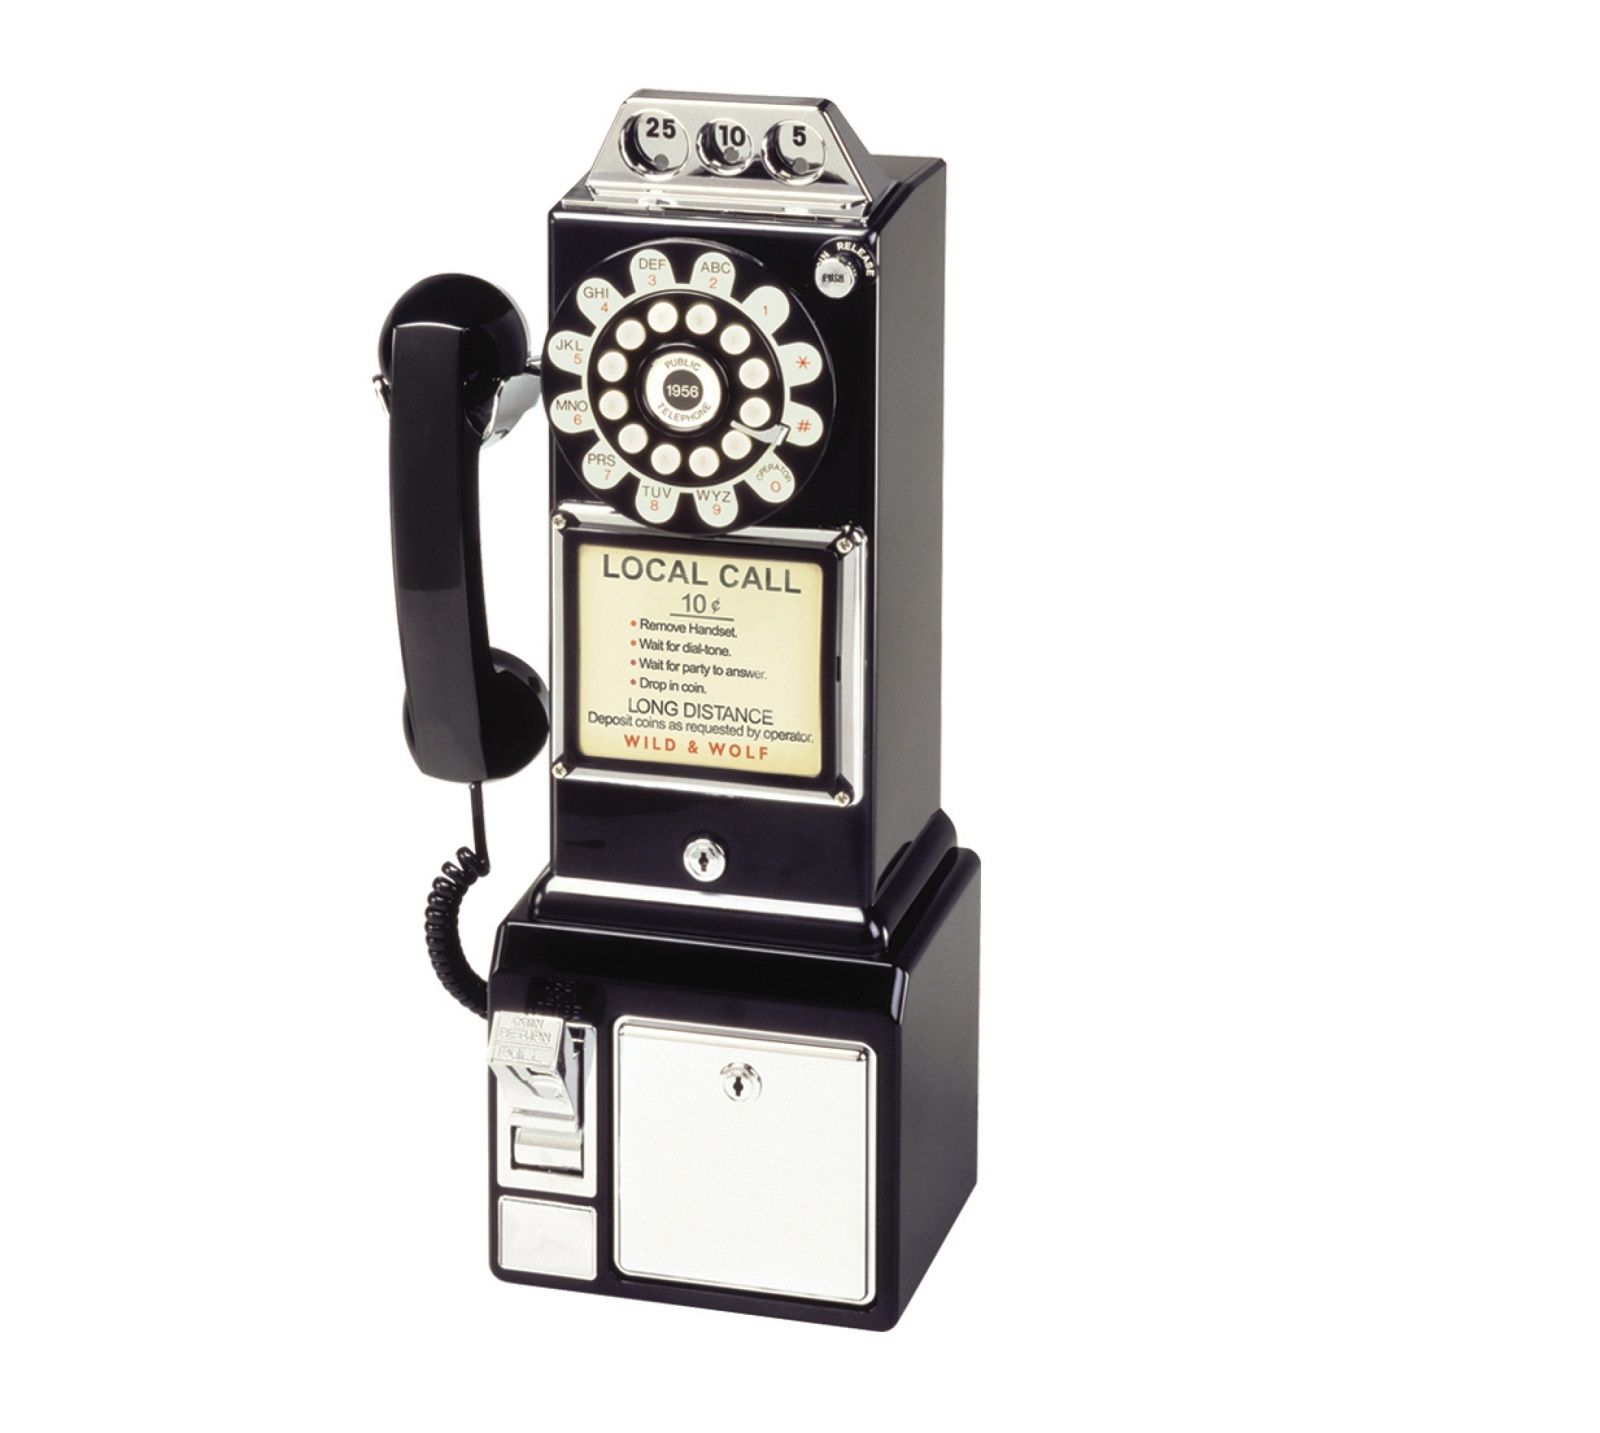 amazing retro gadgets you can buy that will remind you of the glory days image 5